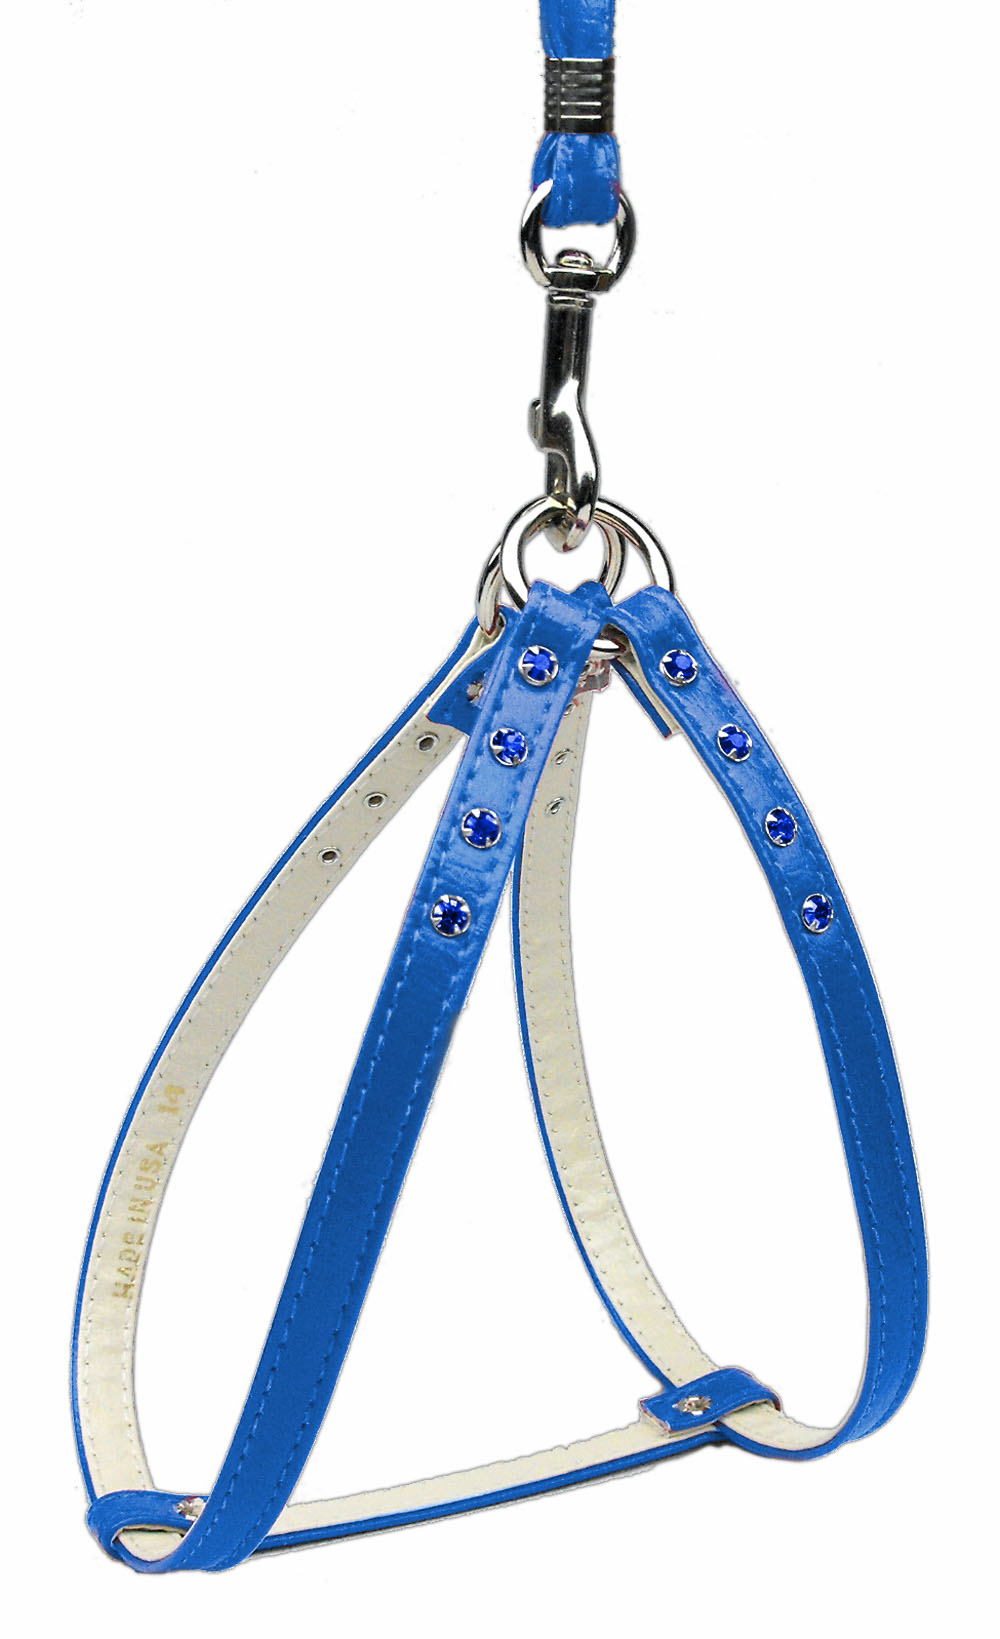 Step-In Harness Blue w/ Blue Stones 10